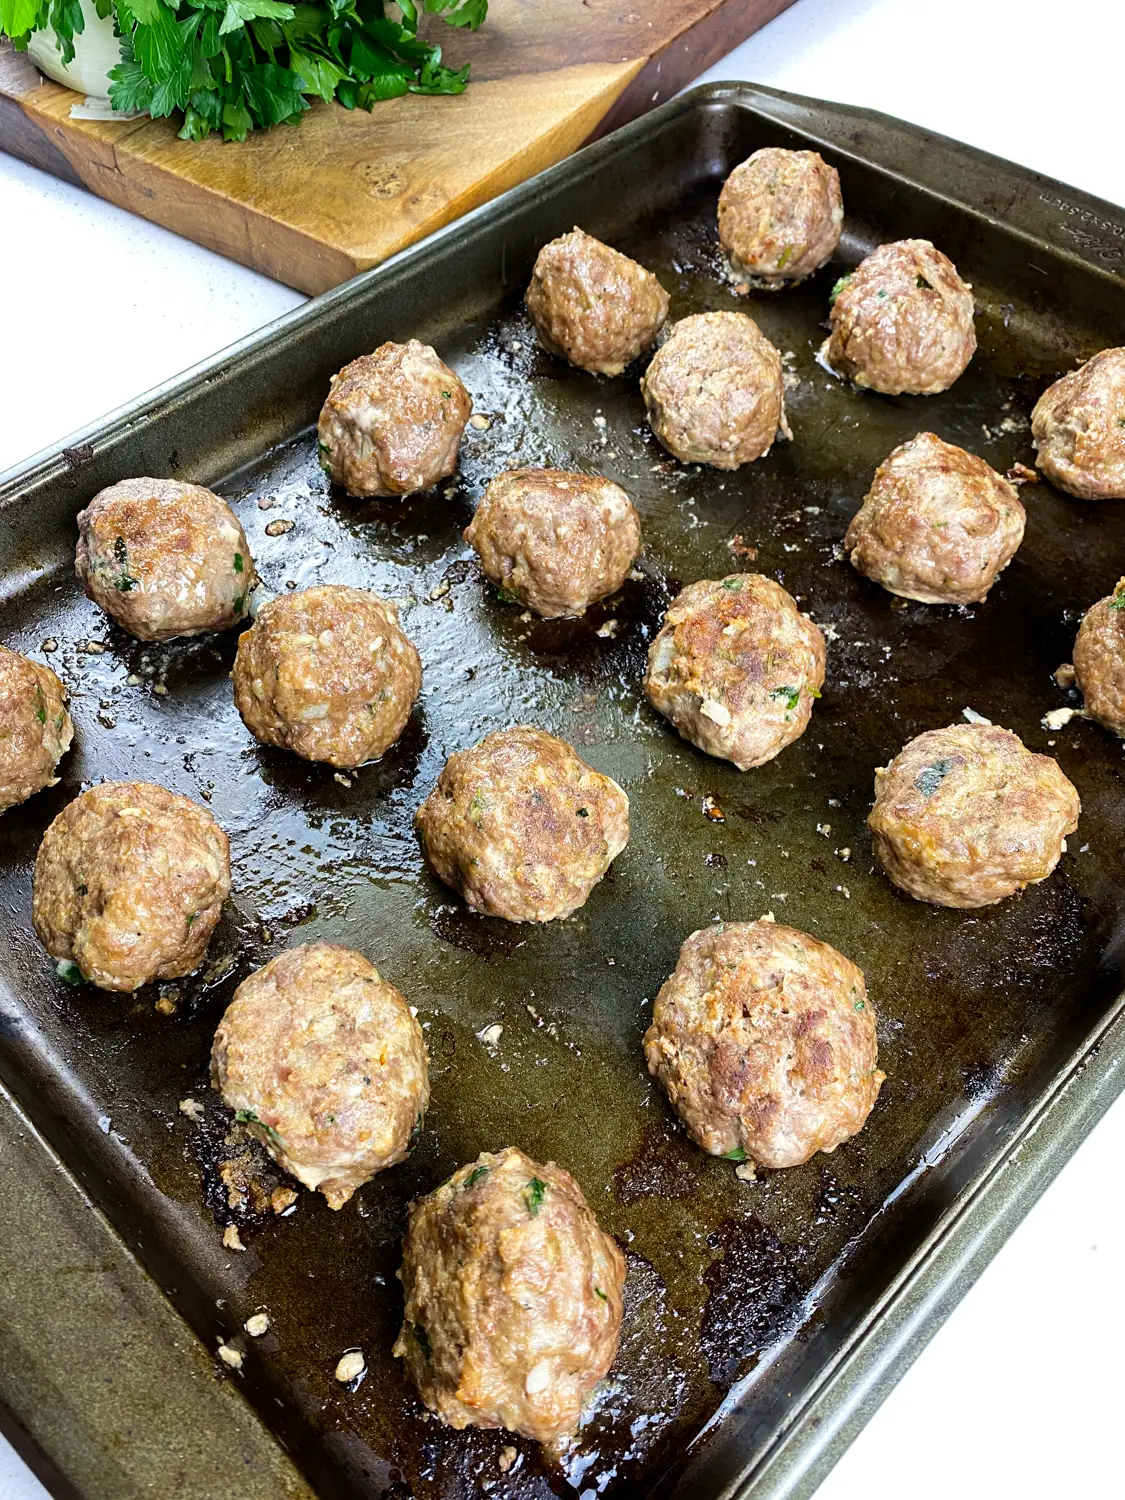 Bake for an additional 8 to 10 minutes, or until an instant-read thermometer inserted into the thickest section of several of the meatballs registers 160 degrees Fahrenheit. Discard after removing from heat.